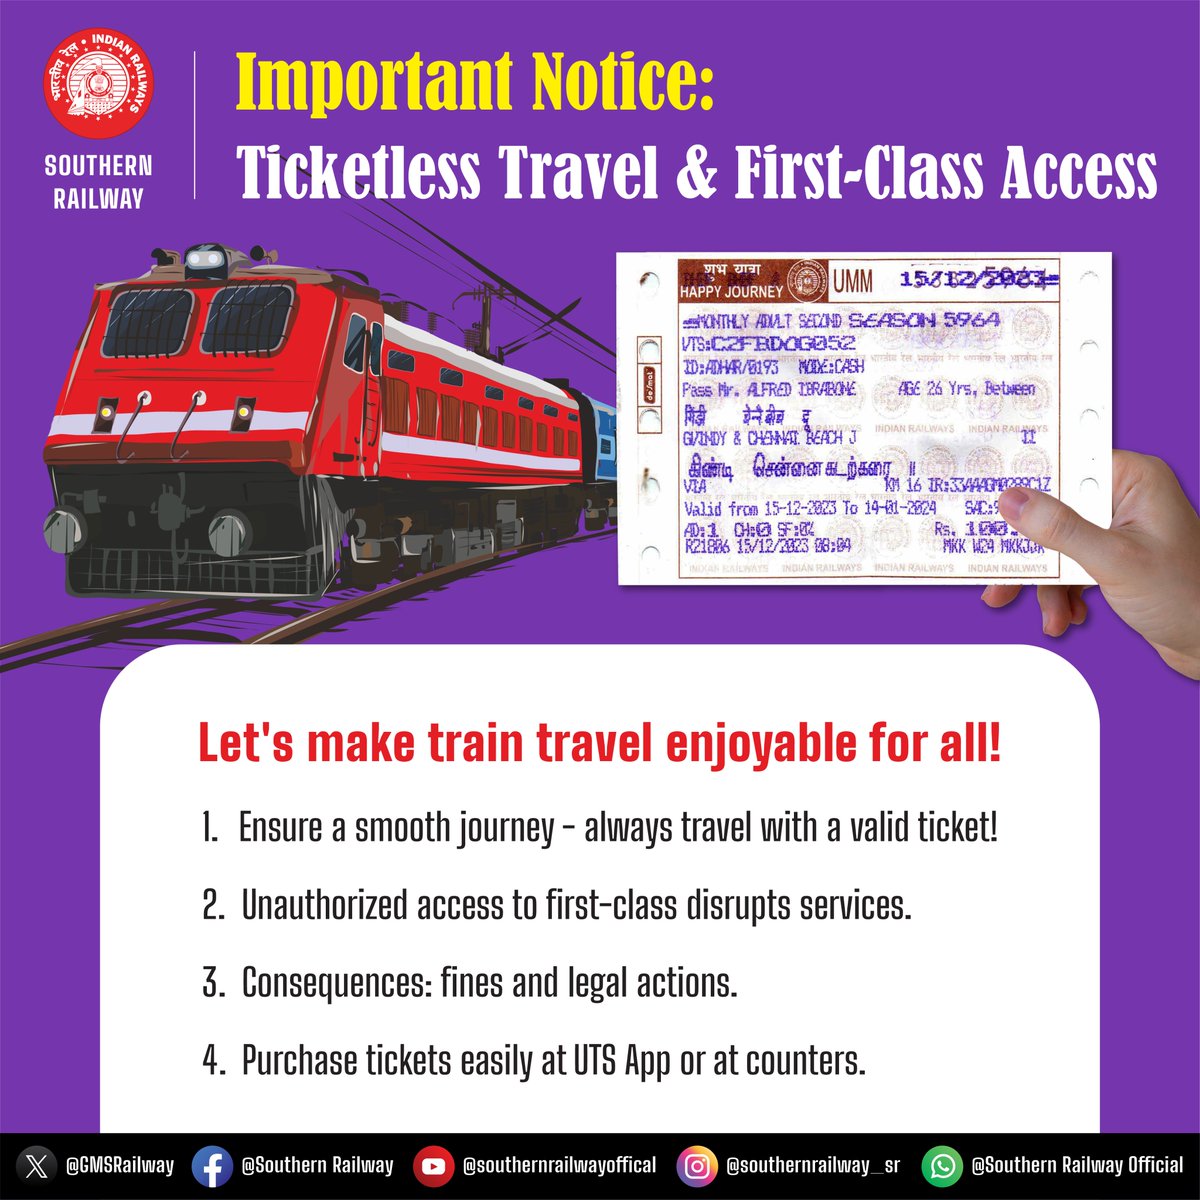 #Travel smart, travel right! 

Ensure a smooth #journey by having a valid ticket. 

#TicketlessTravel #UTSapp #TrainEtiquette